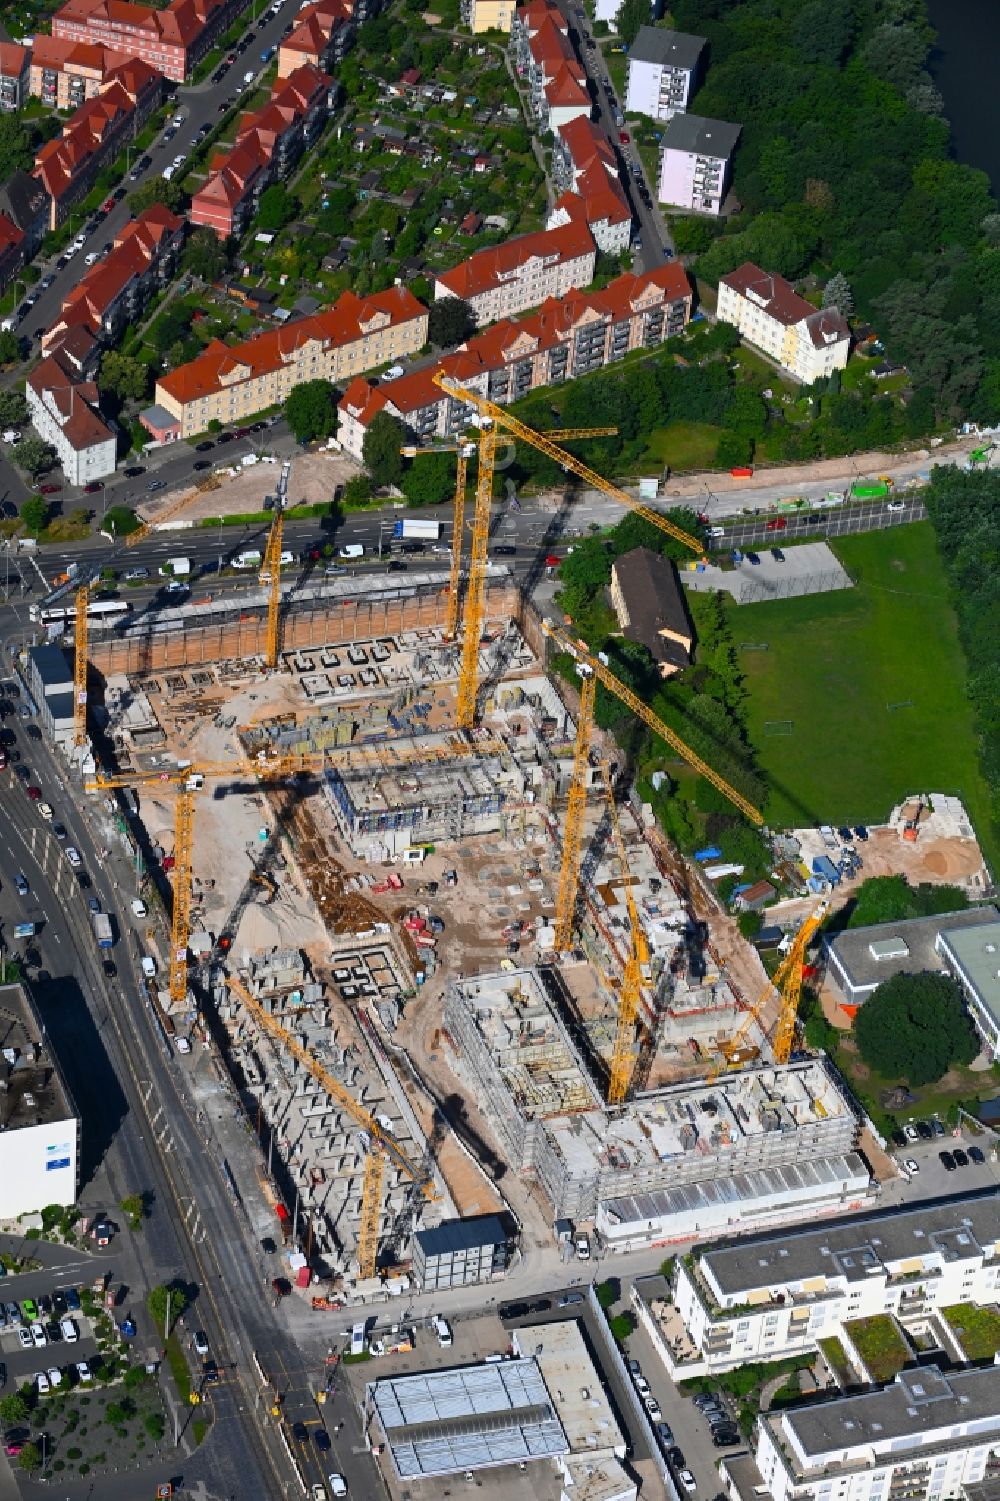 Nürnberg from above - Construction site to build a new multi-family residential and commercial building quarter Seetor City Campus on Ostendstrasse - corner of Dr.-Gustav-Heinemann-Strasse in Nuremberg in the state Bavaria, Germany